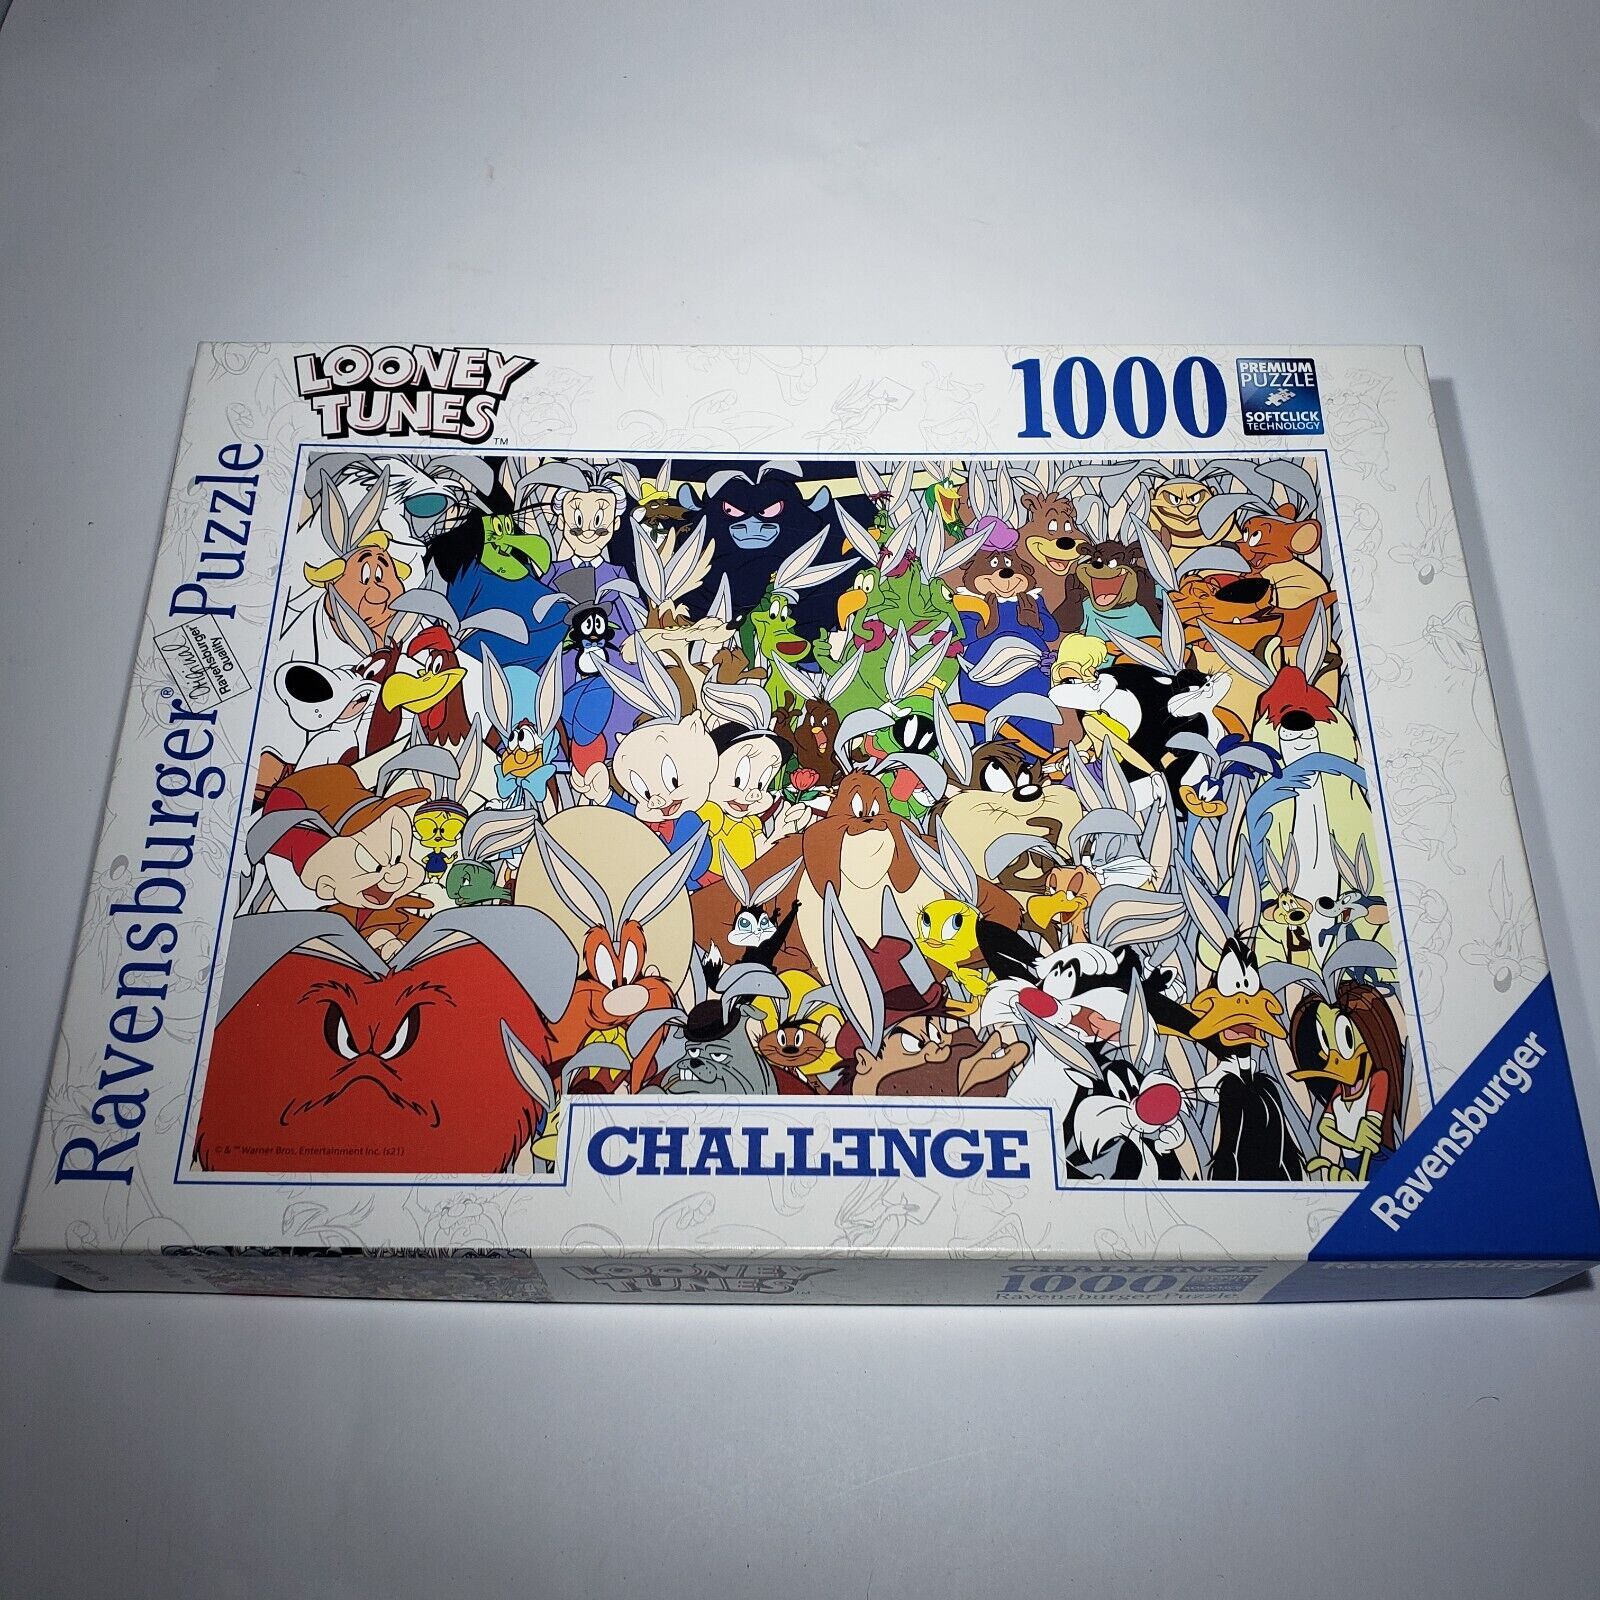 Primary image for Looney Tunes Challenge 169269 Ravensburger 1000 Pc Jigsaw Puzzle 27x20" Complete